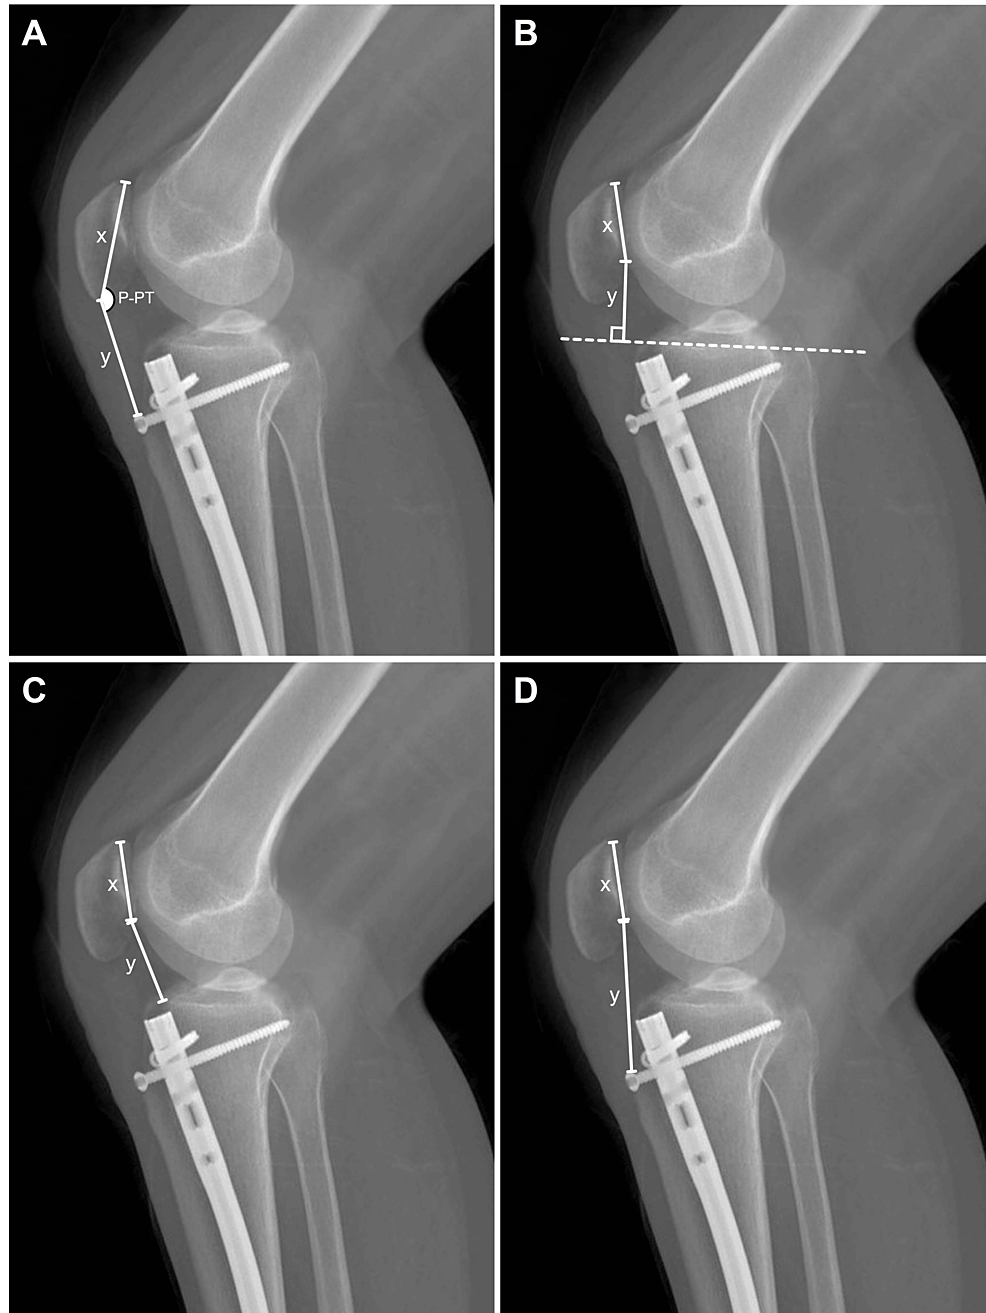 Fixation of Distal Tibial Fractures by Intramedullary Nail with  Multidirectional Distal Locking Screws